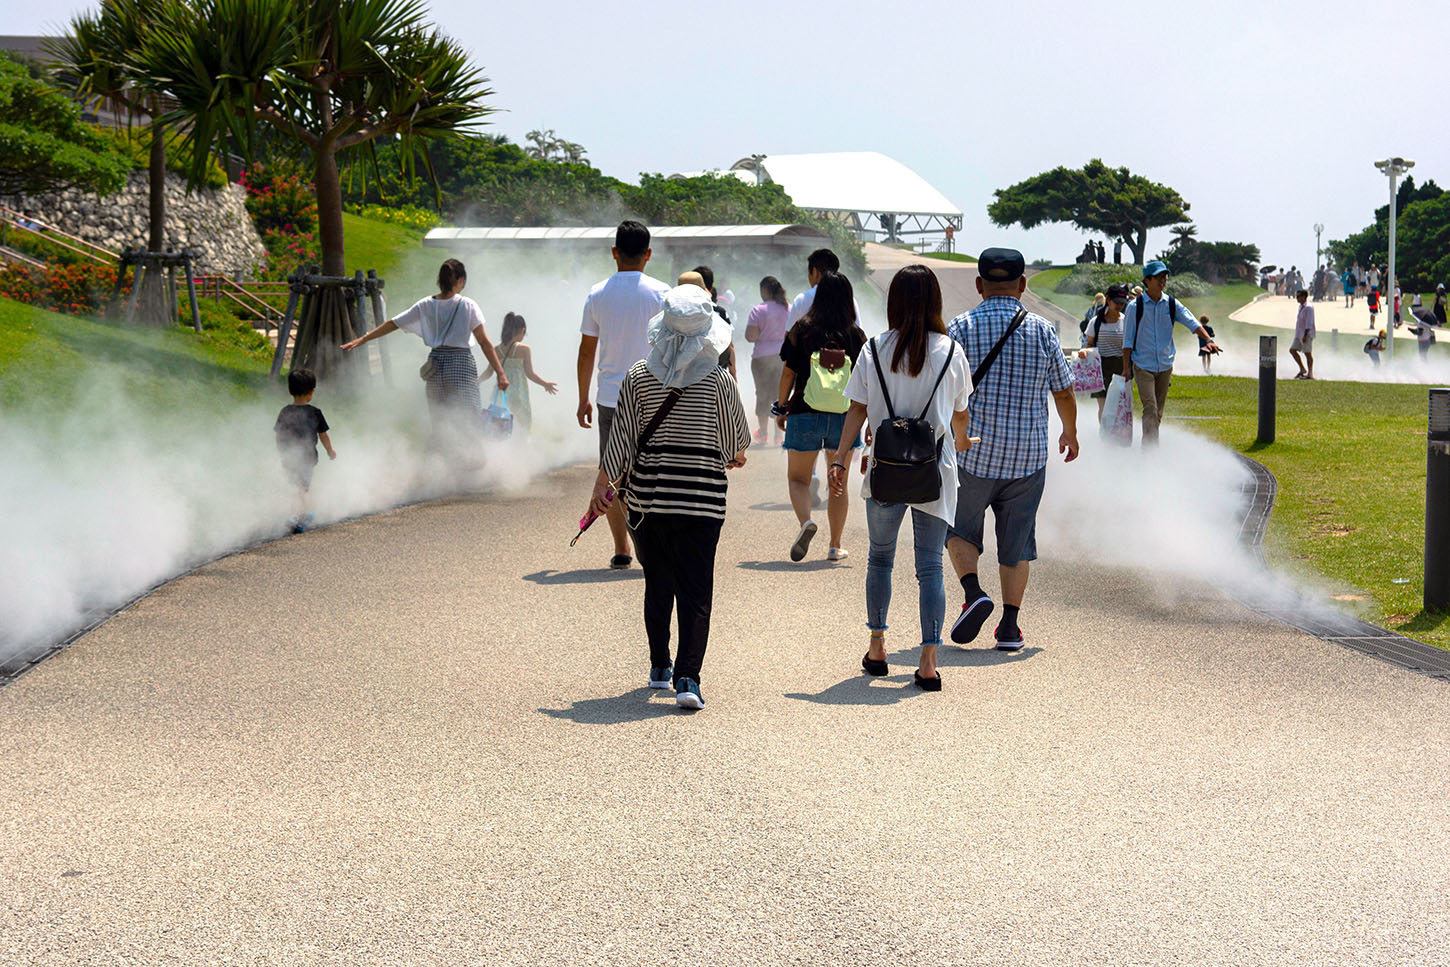 Sightseeing scenery that simply shows the weather and clothes in Okinawa in August3